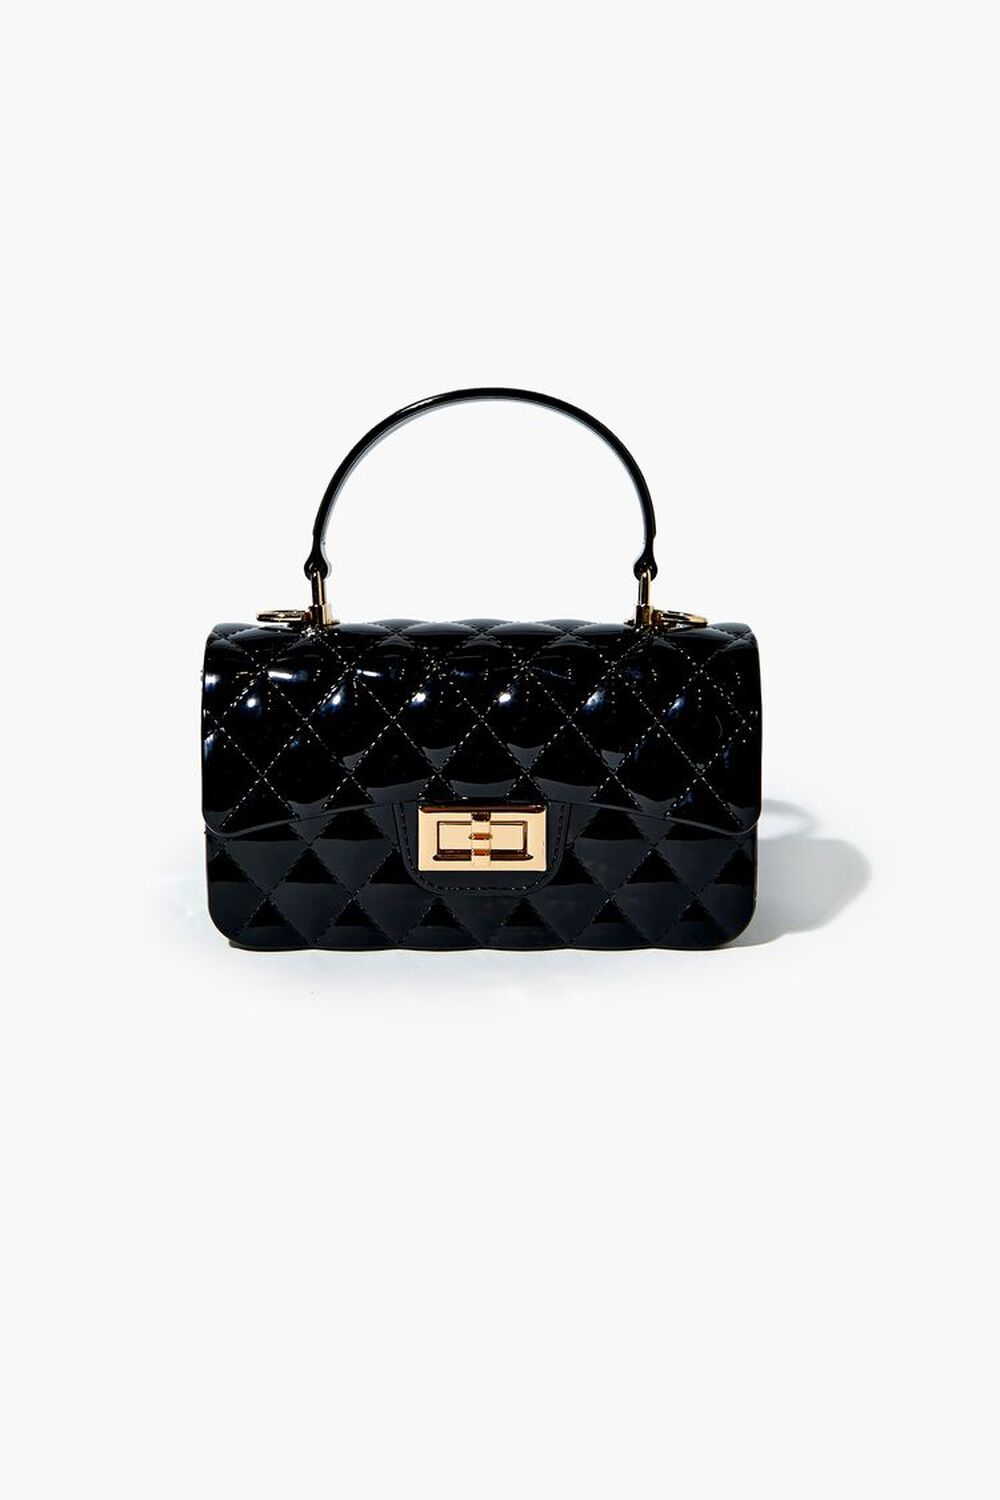 BLACK Quilted Crossbody Bag, image 2